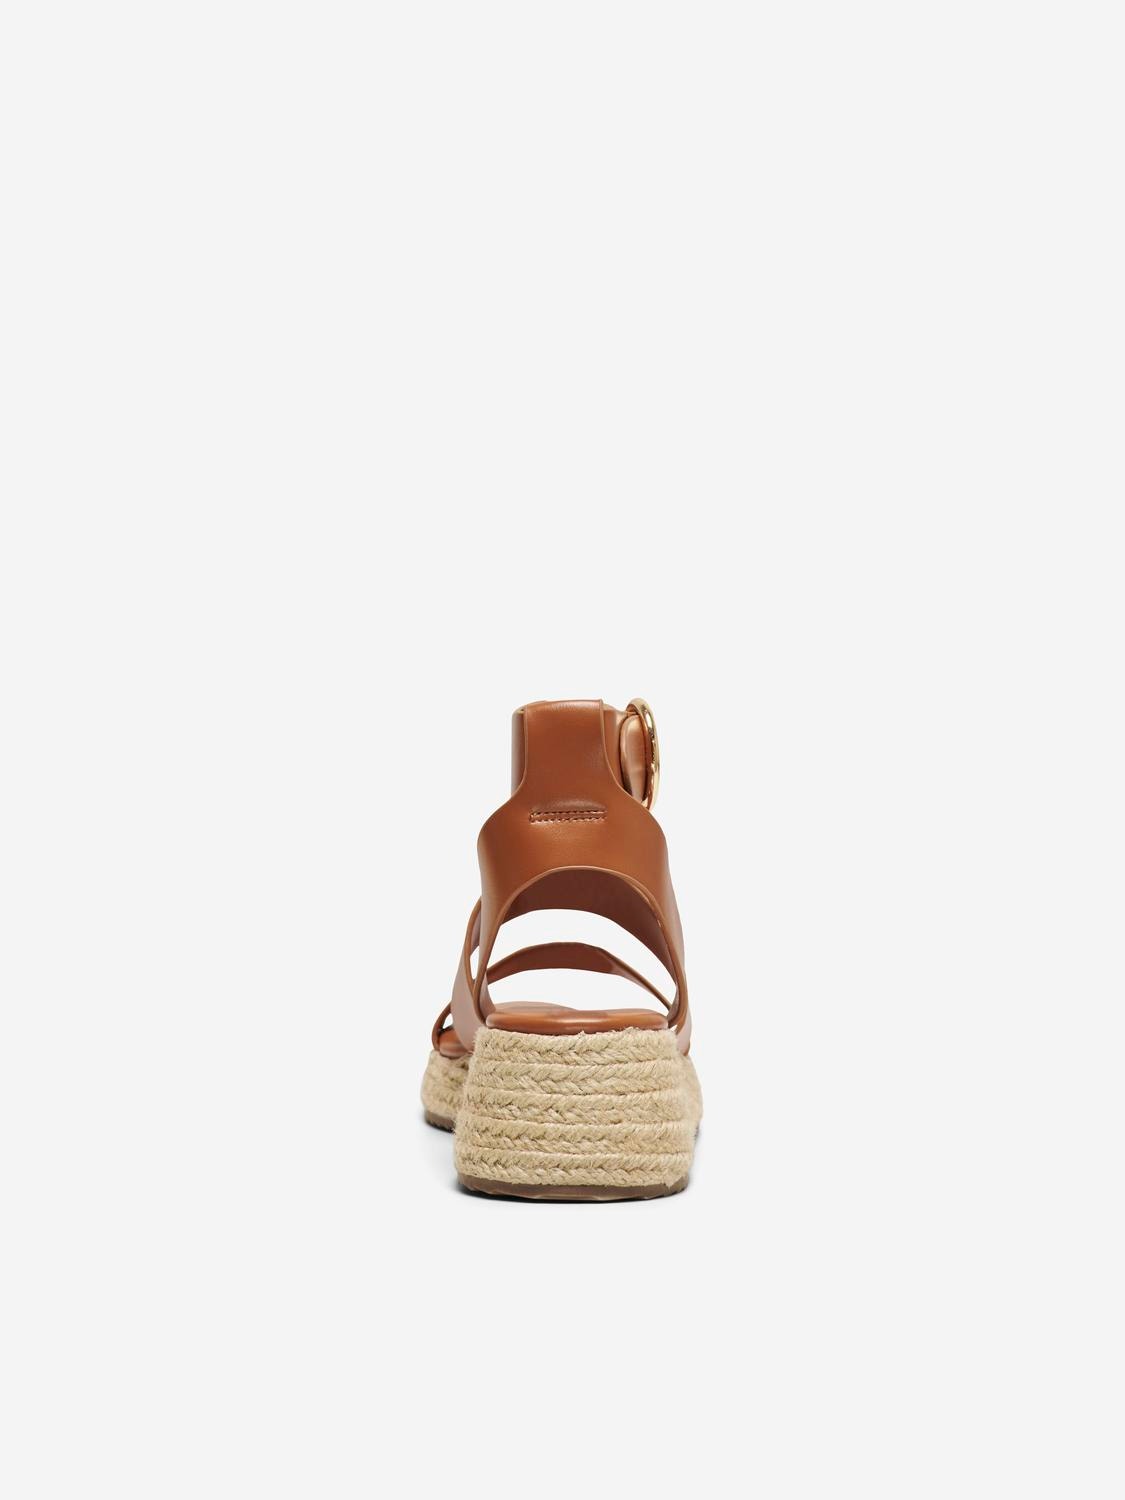 ONLY Sandals with buckle -Cognac - 15320197